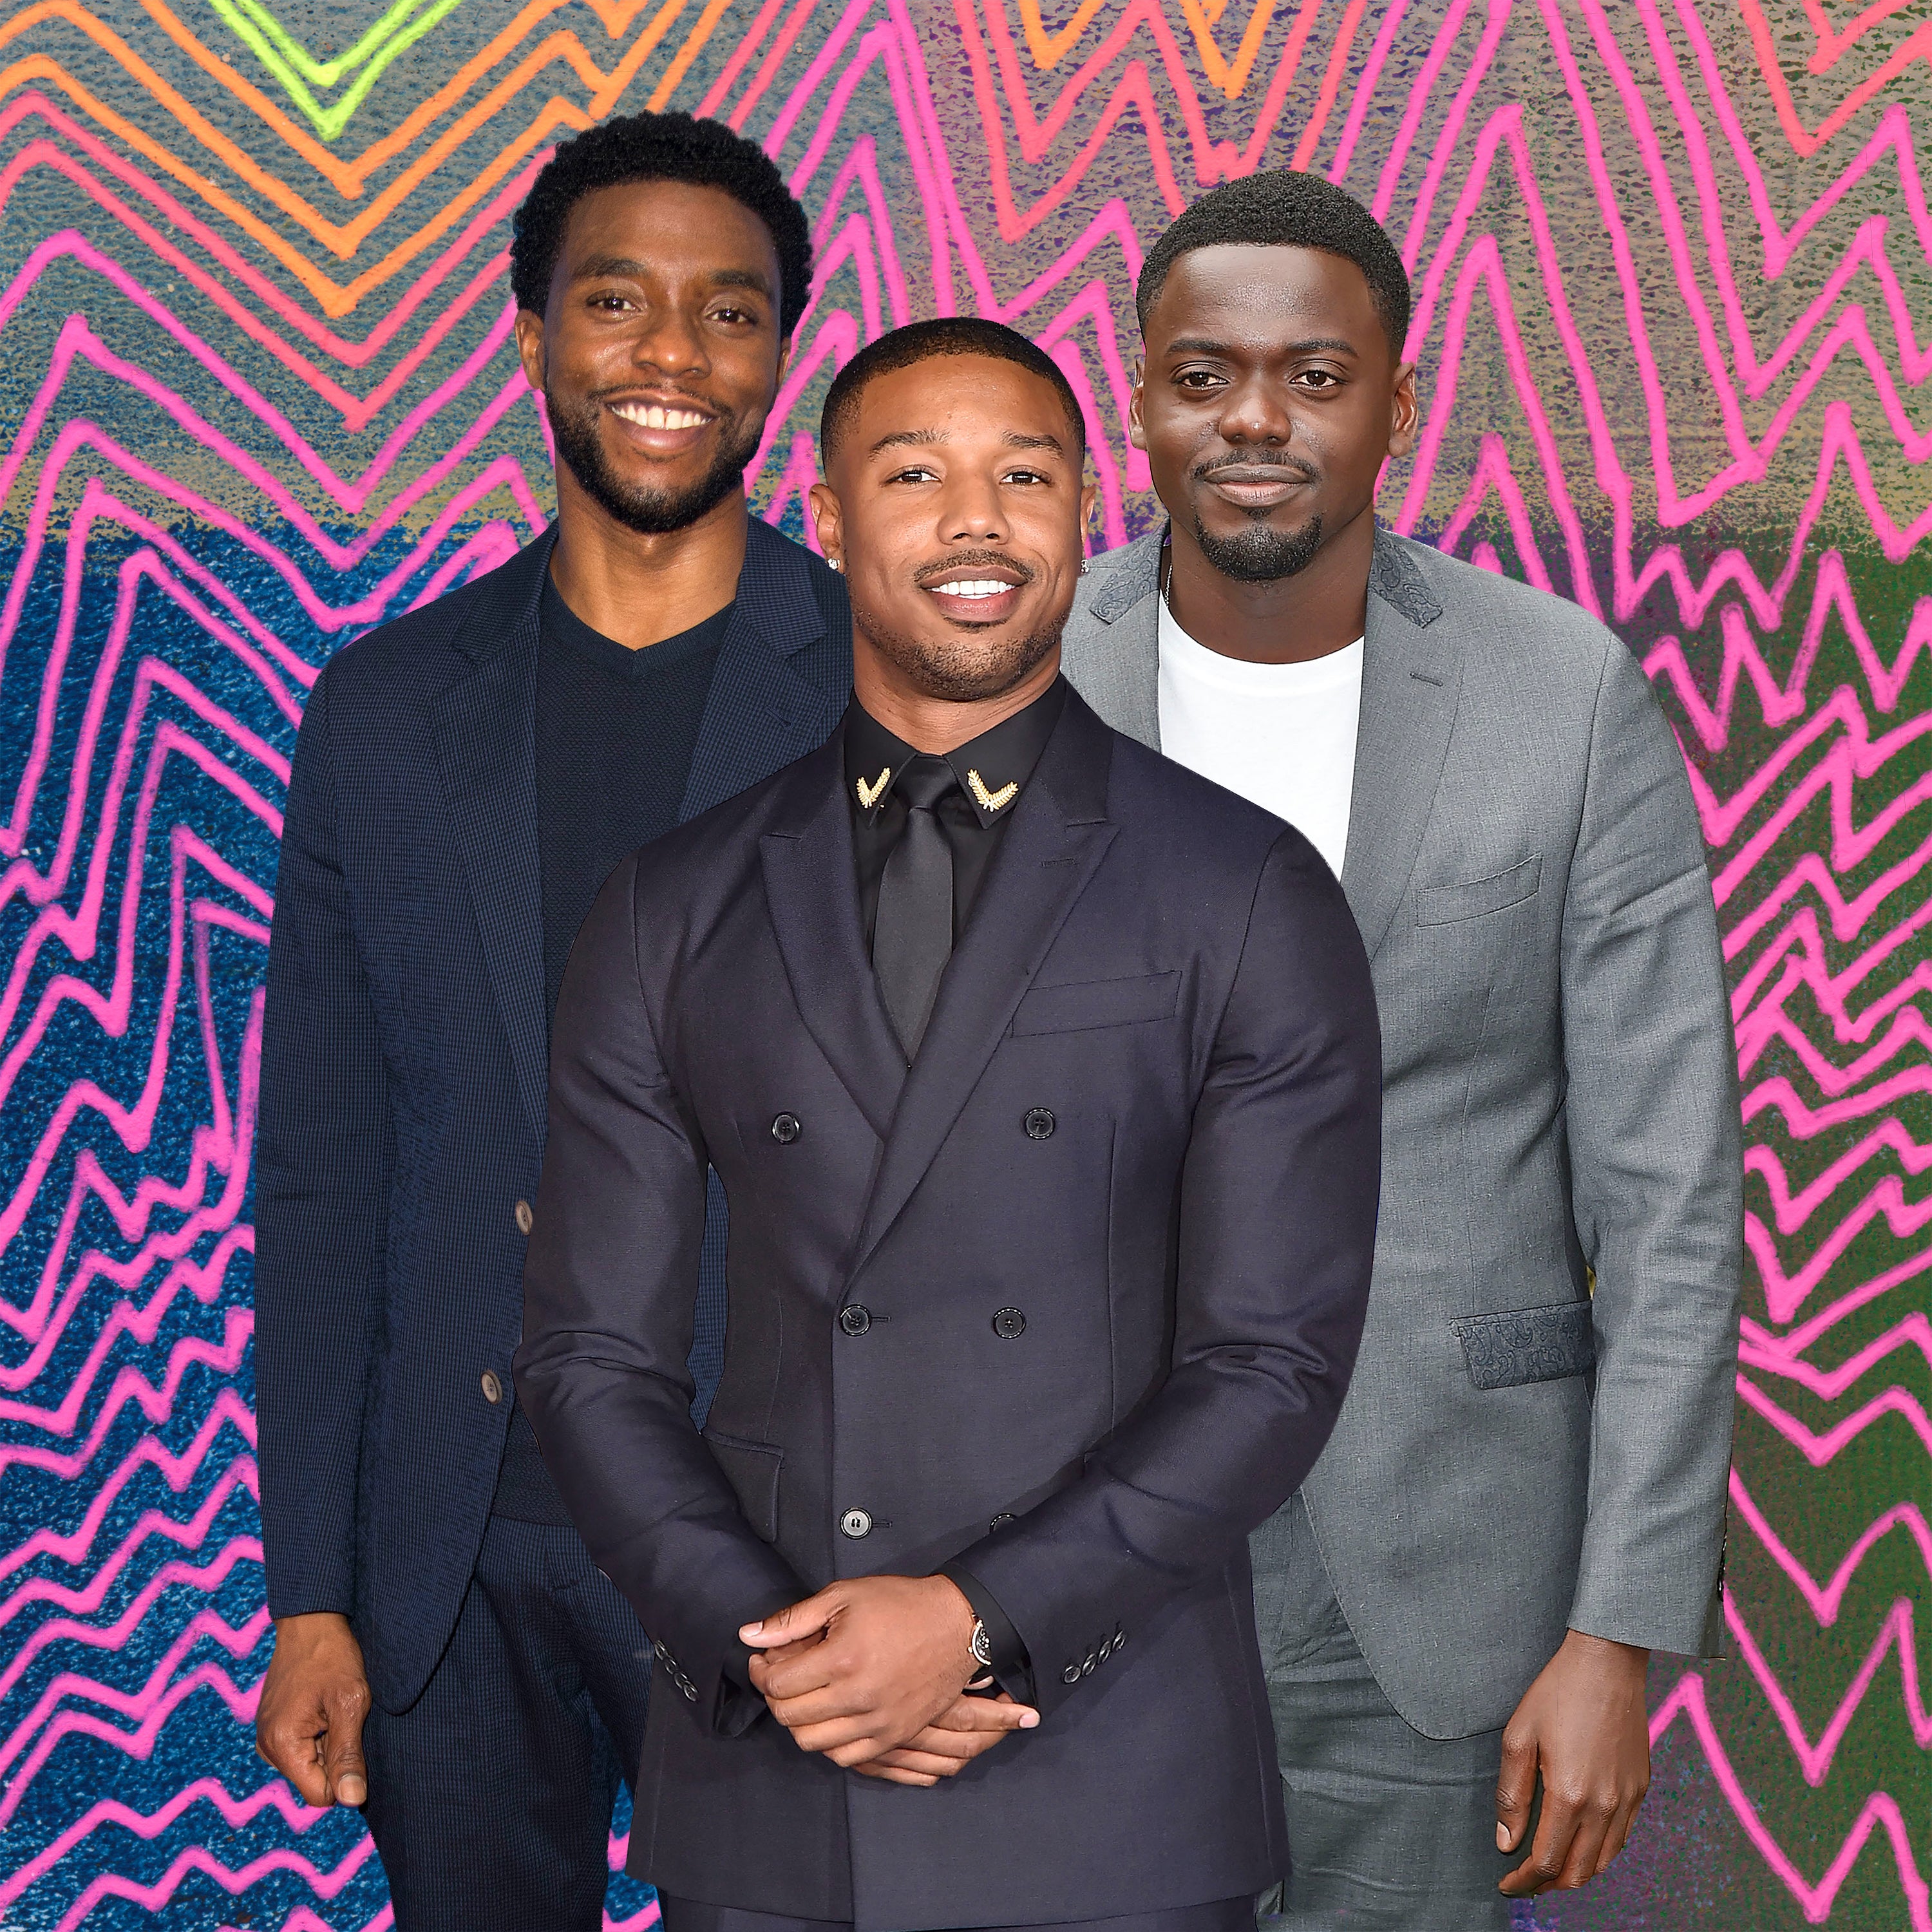 Swoon Alert! All Of The Sexy Faces We Can't Wait To See Grace The Screen In 'Black Panther'
